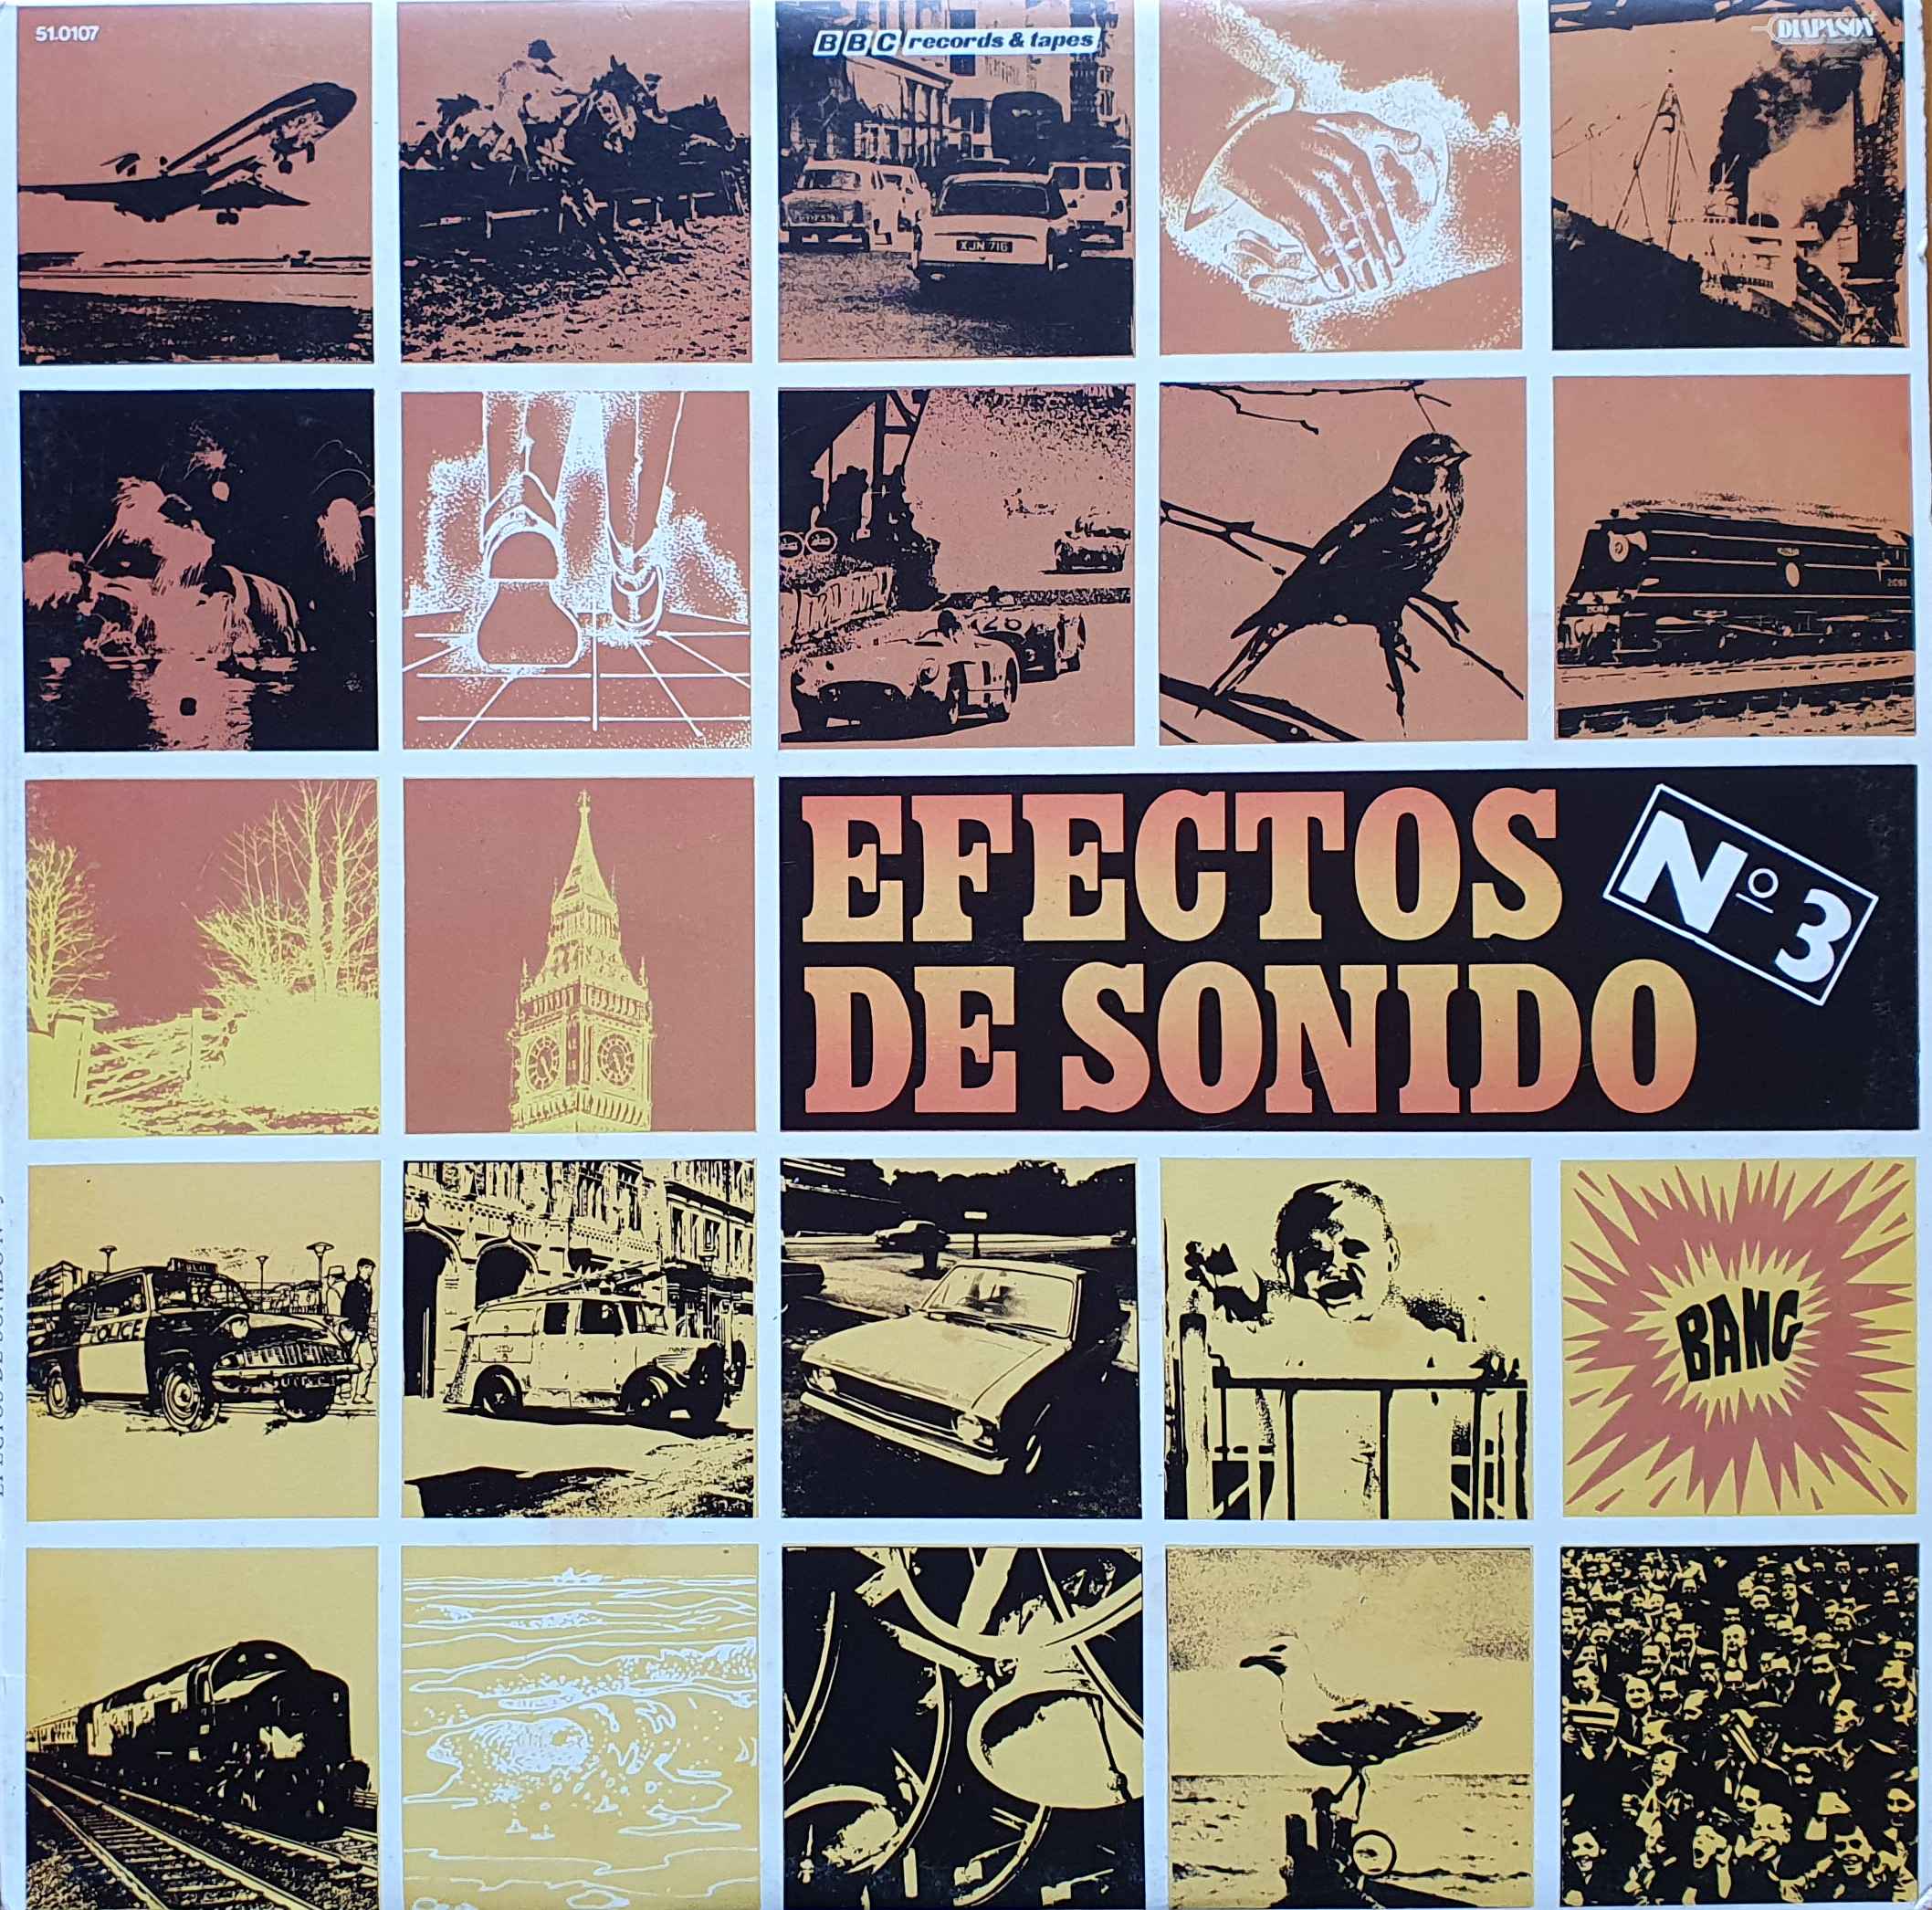 Picture of 51.0107 Efectos de sonido No 3 by artist Various from the BBC albums - Records and Tapes library